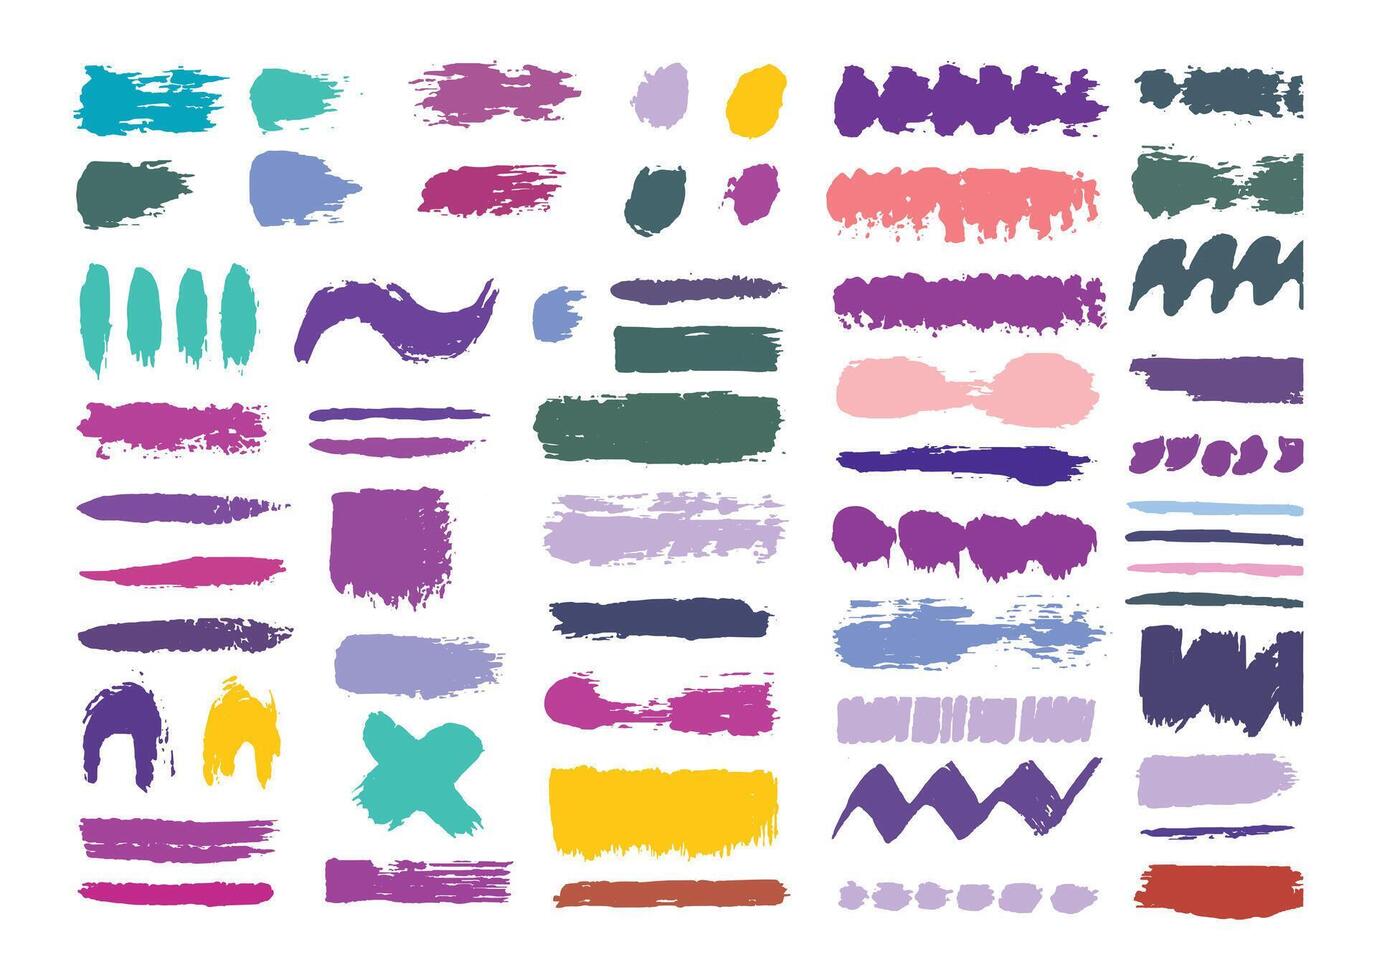 Abstract rough ink brush strokes element bundle. Simple paint strokes texture template. Grunge brushes design for artistic illustration. Colored lines and blocks design. vector